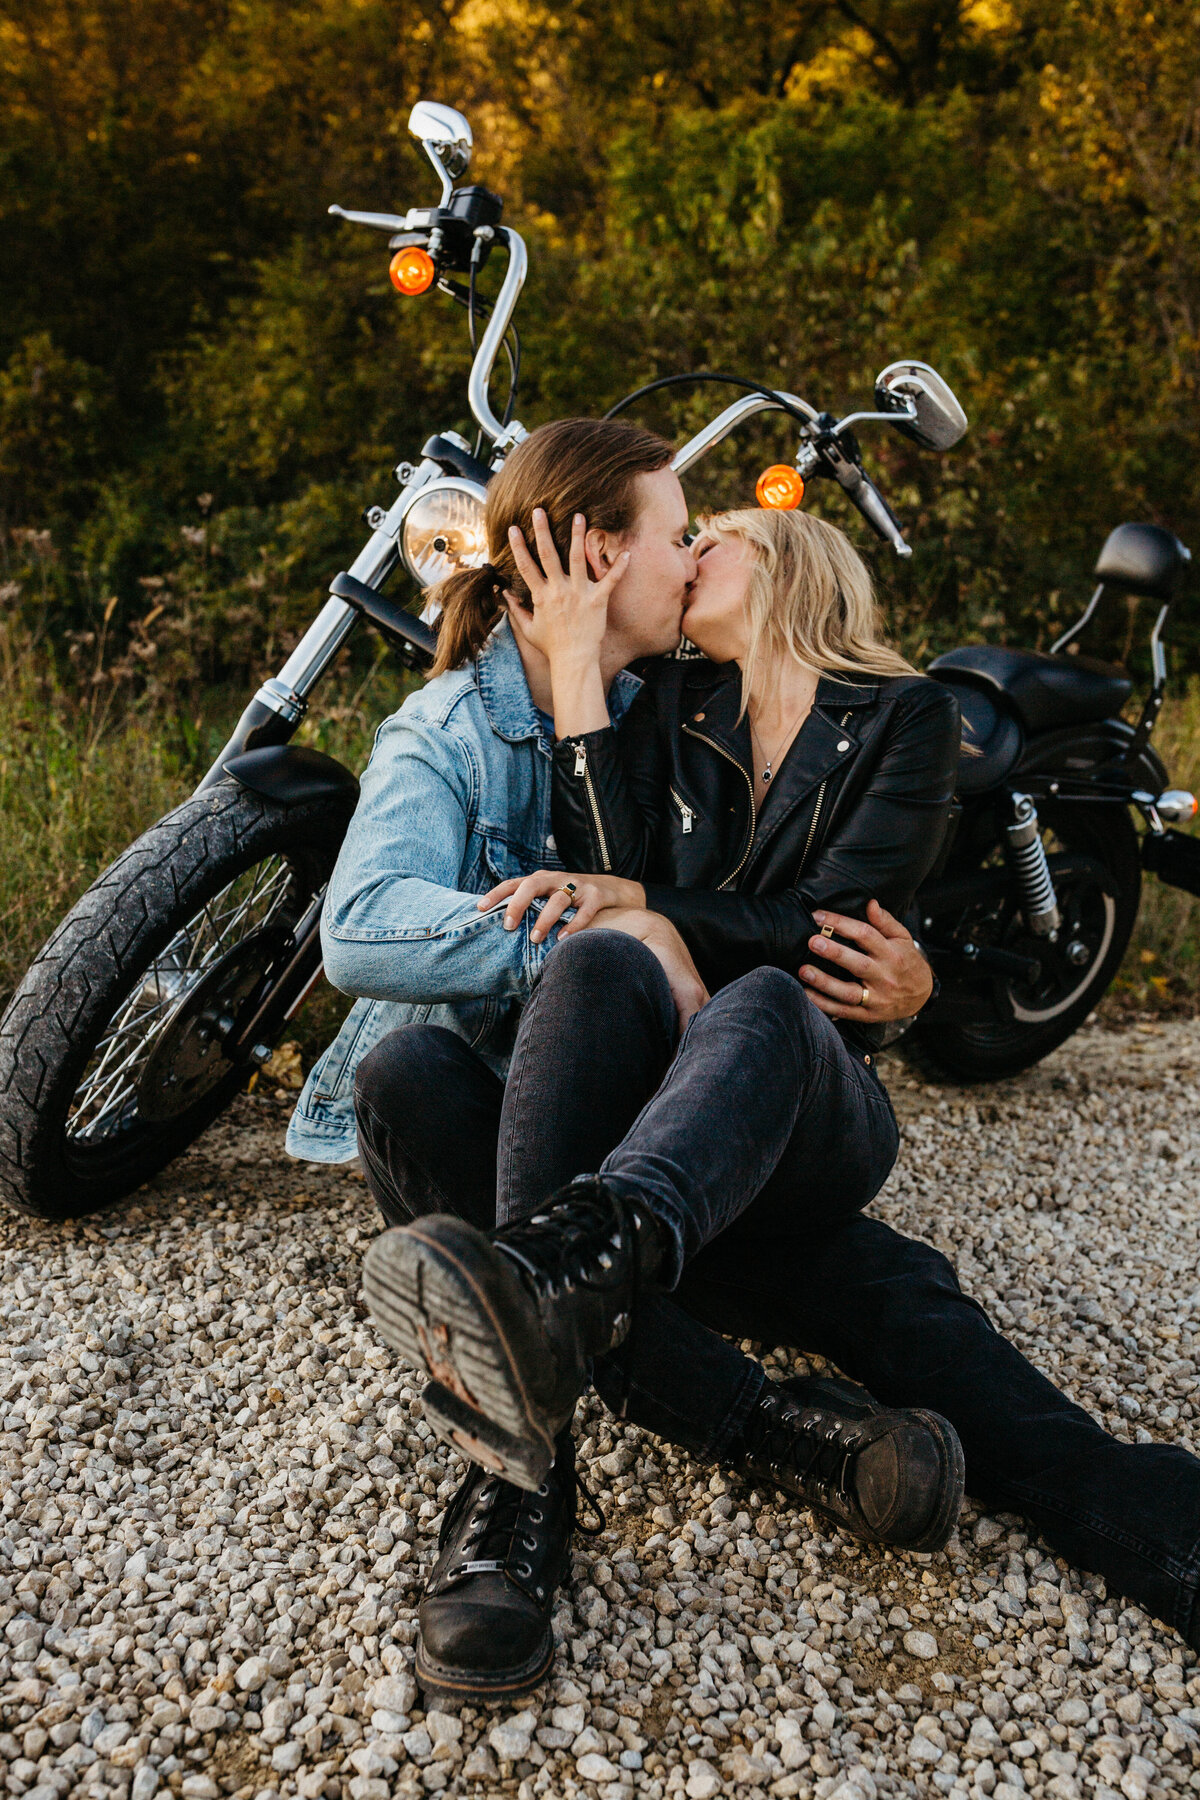 couple-kissing-by-motocycle